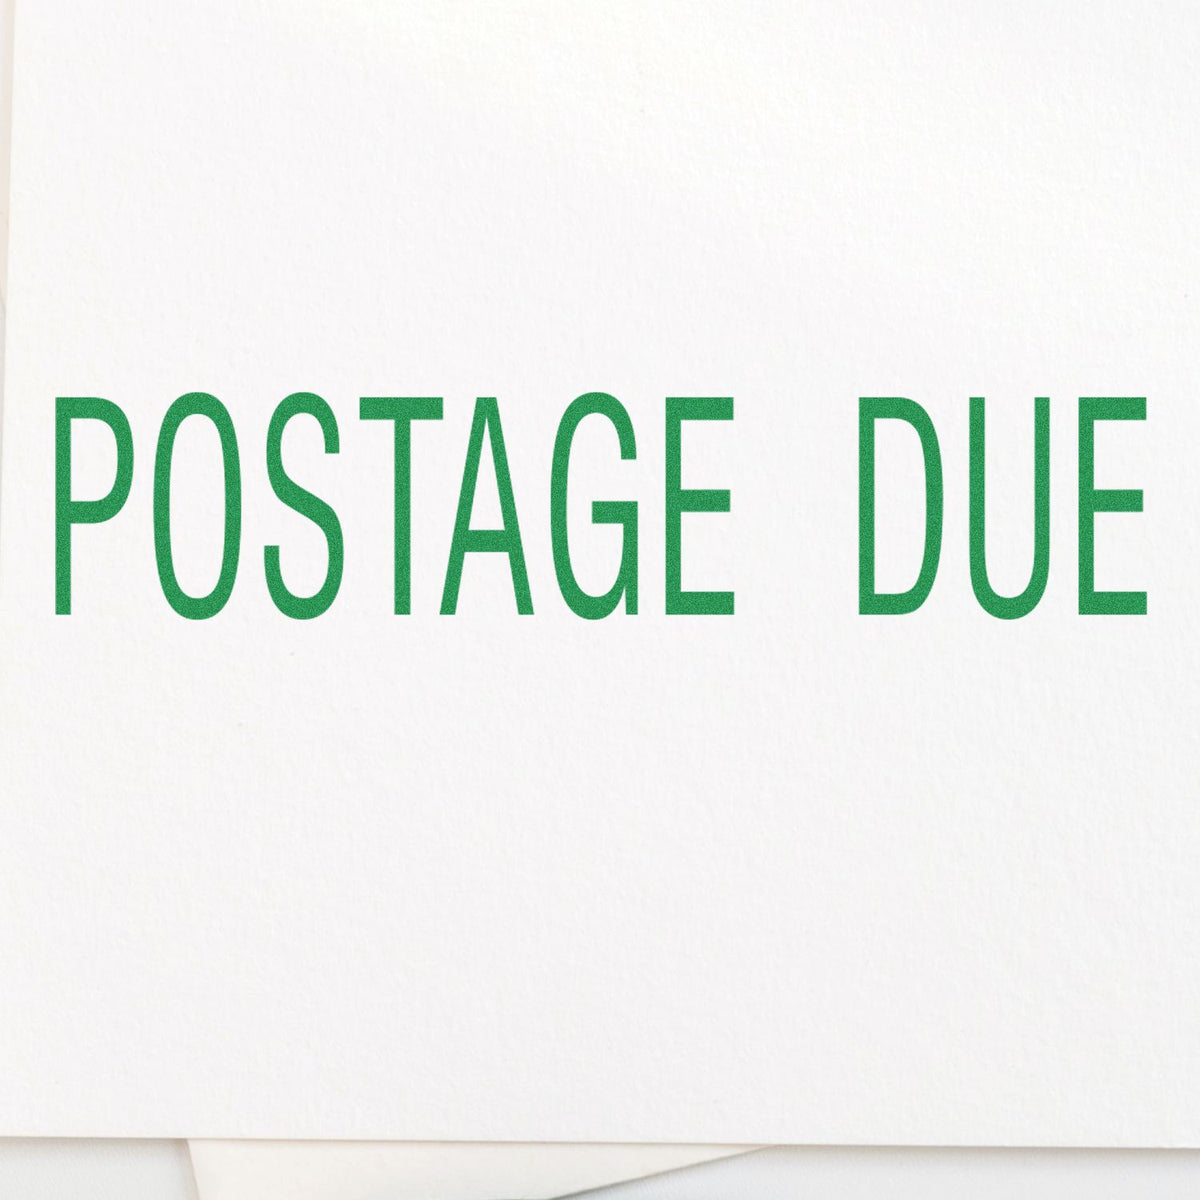 Large Postage Due Rubber Stamp In Use